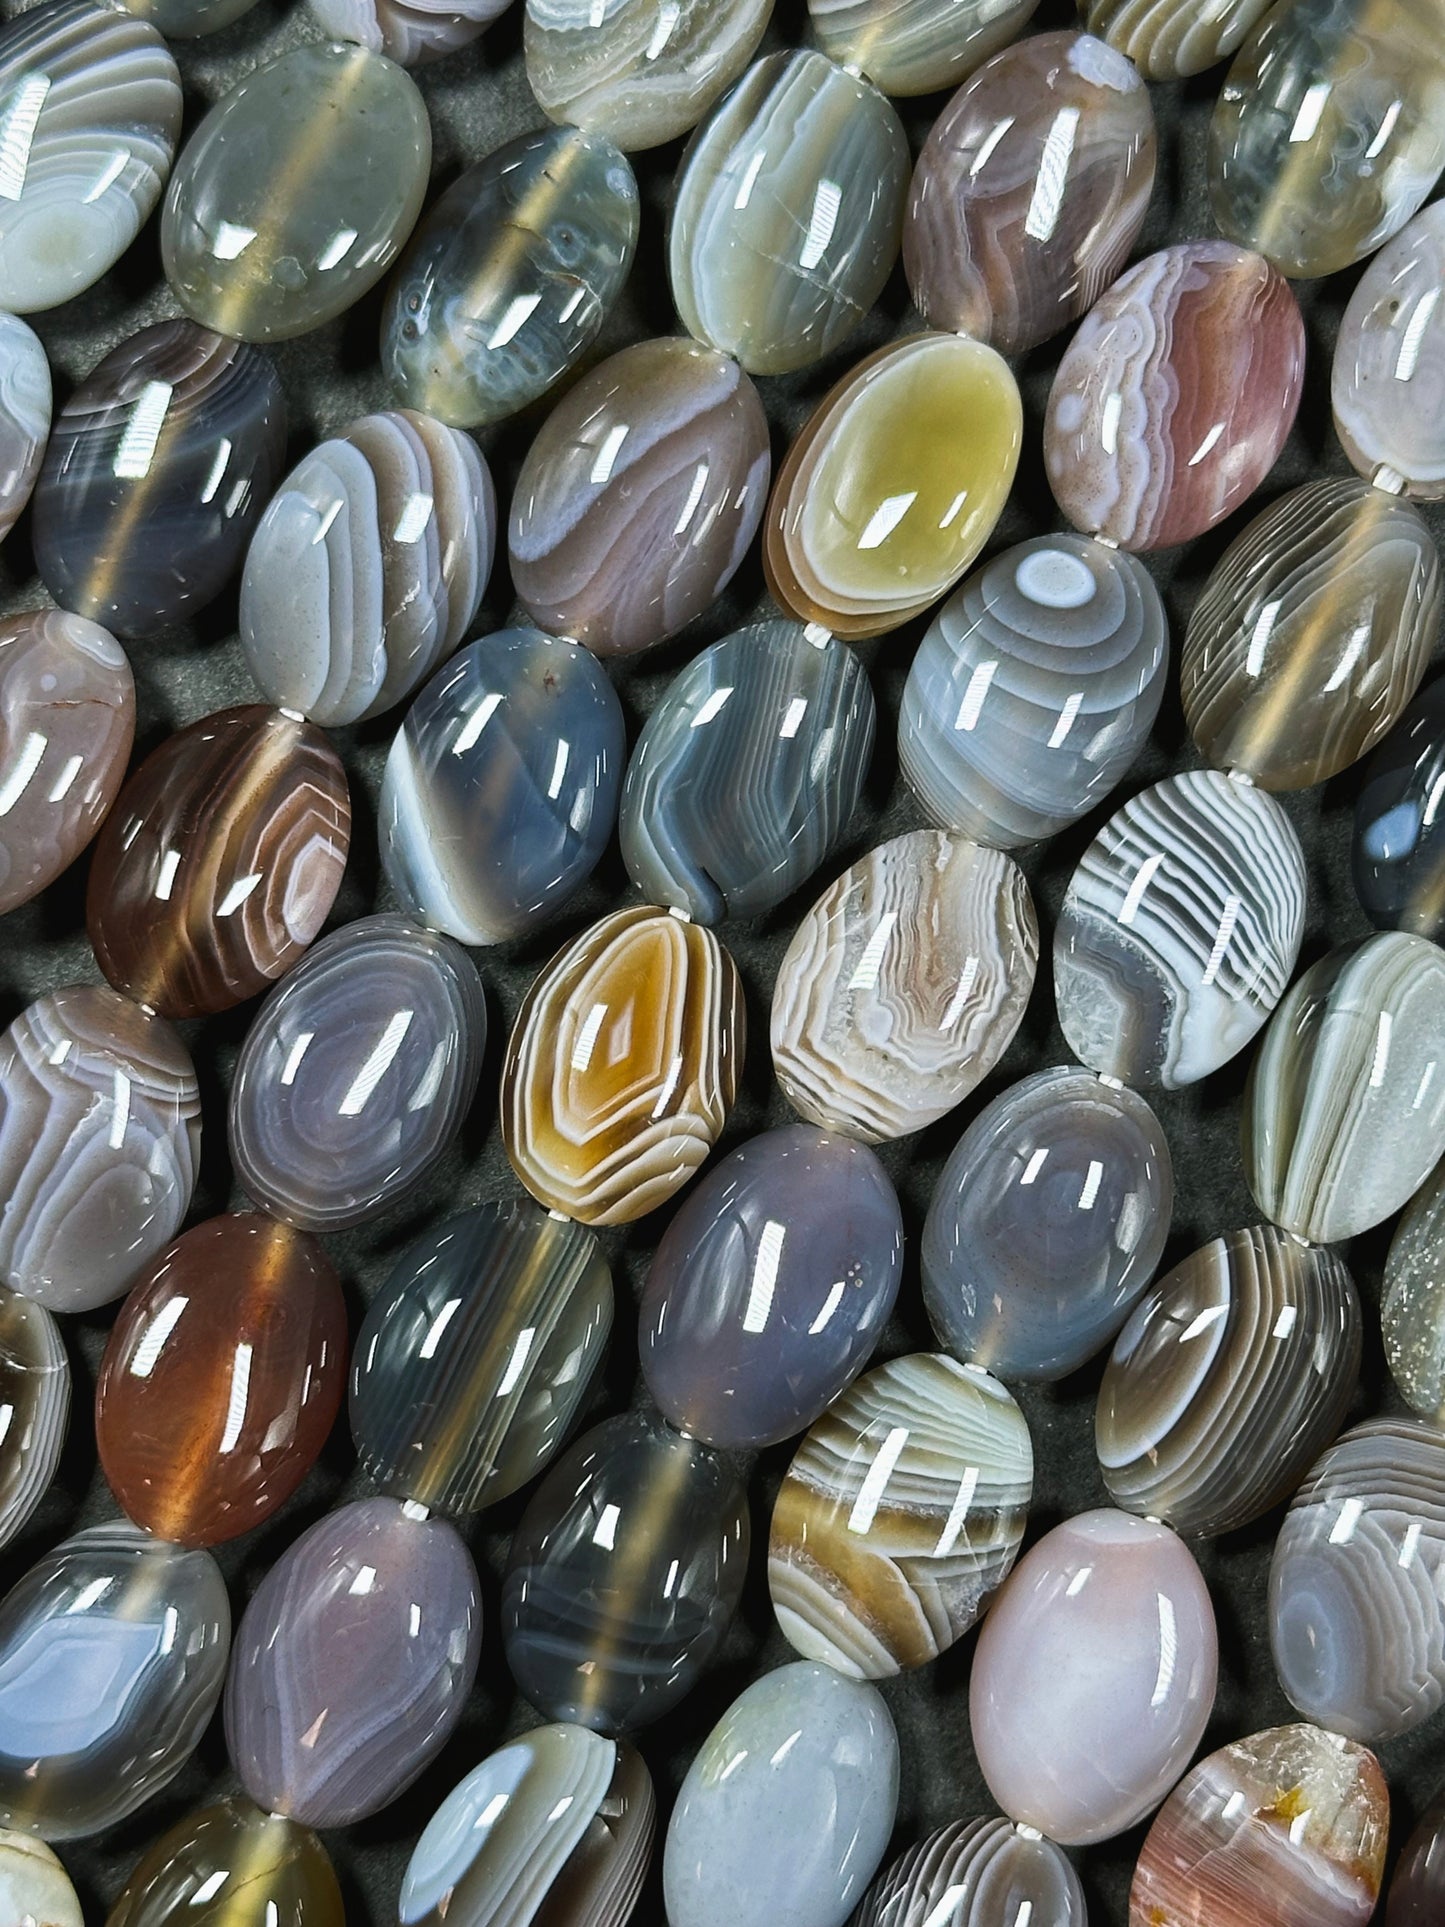 AAA Natural Botswana Agate Gemstone Bead 10x14mm Oval Shape, Beautiful Natural Gray Brown Color Agate, Excellent Quality Full Strand 15.5"